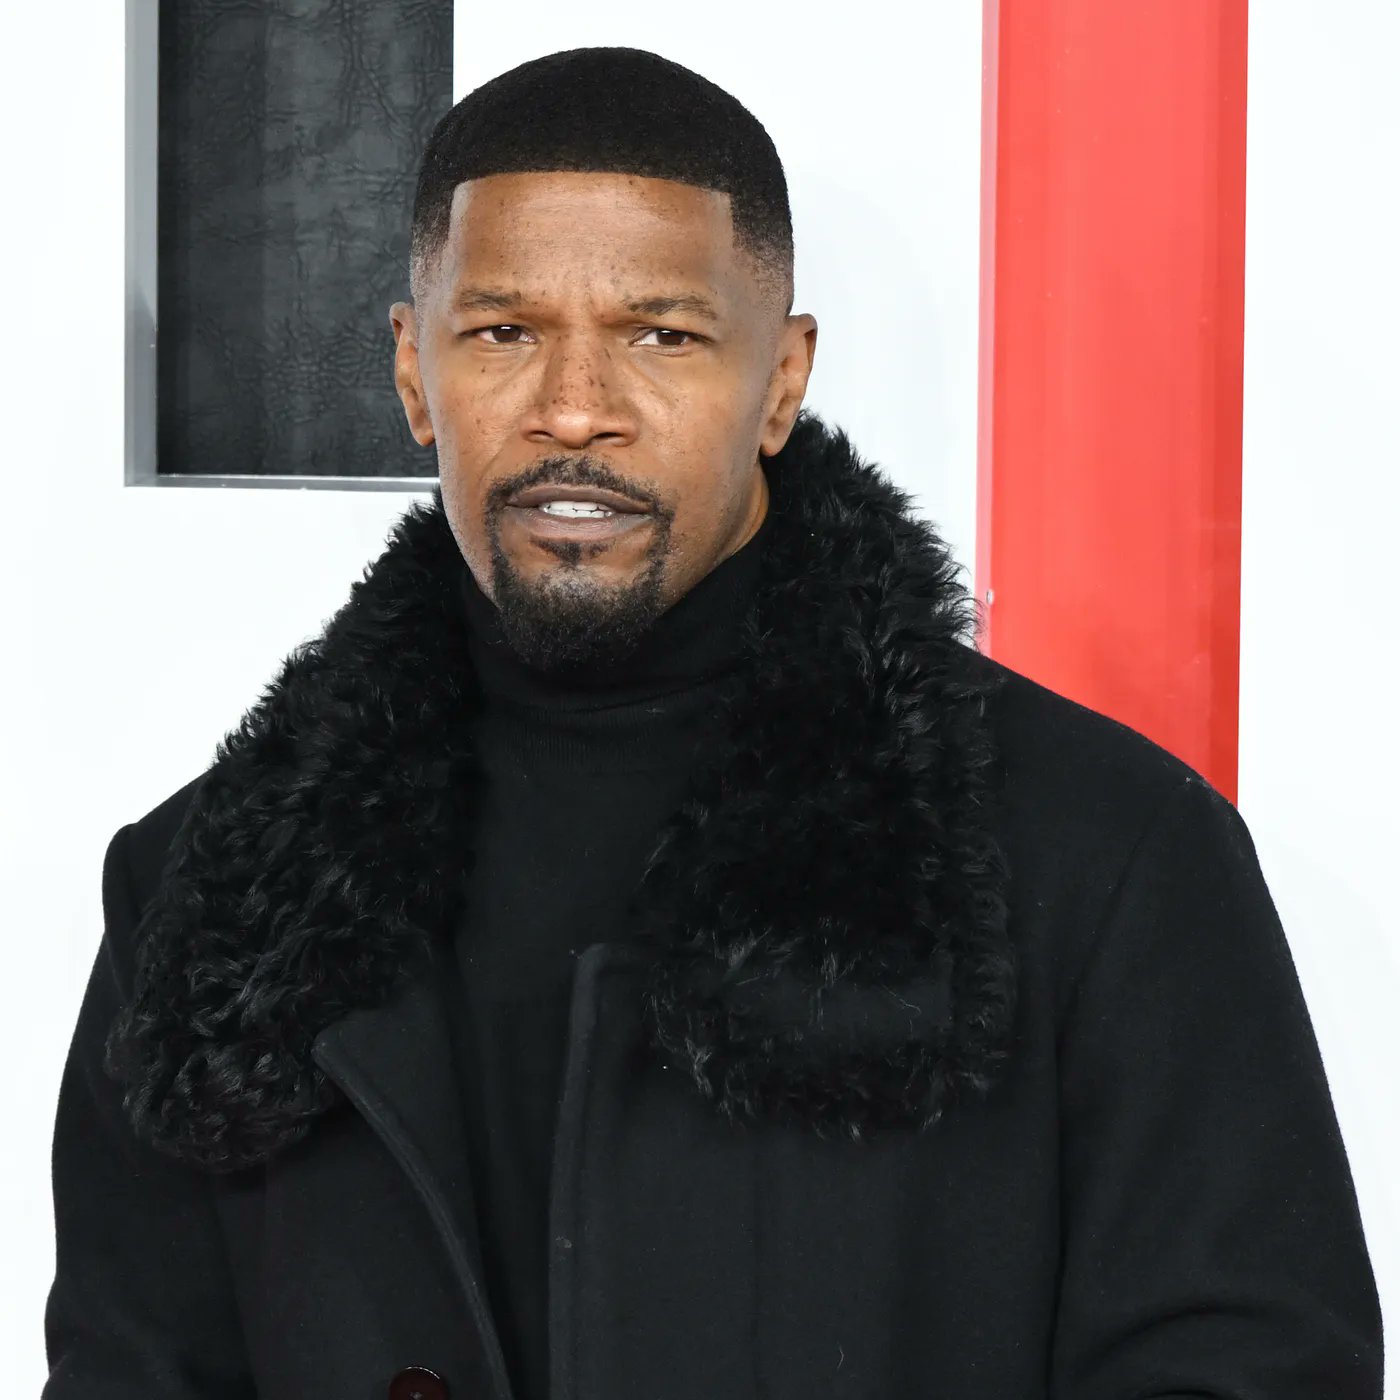 Jamie Foxx Trends On Socials – Someone Posted On His IG Account Saying He Feels Blessed